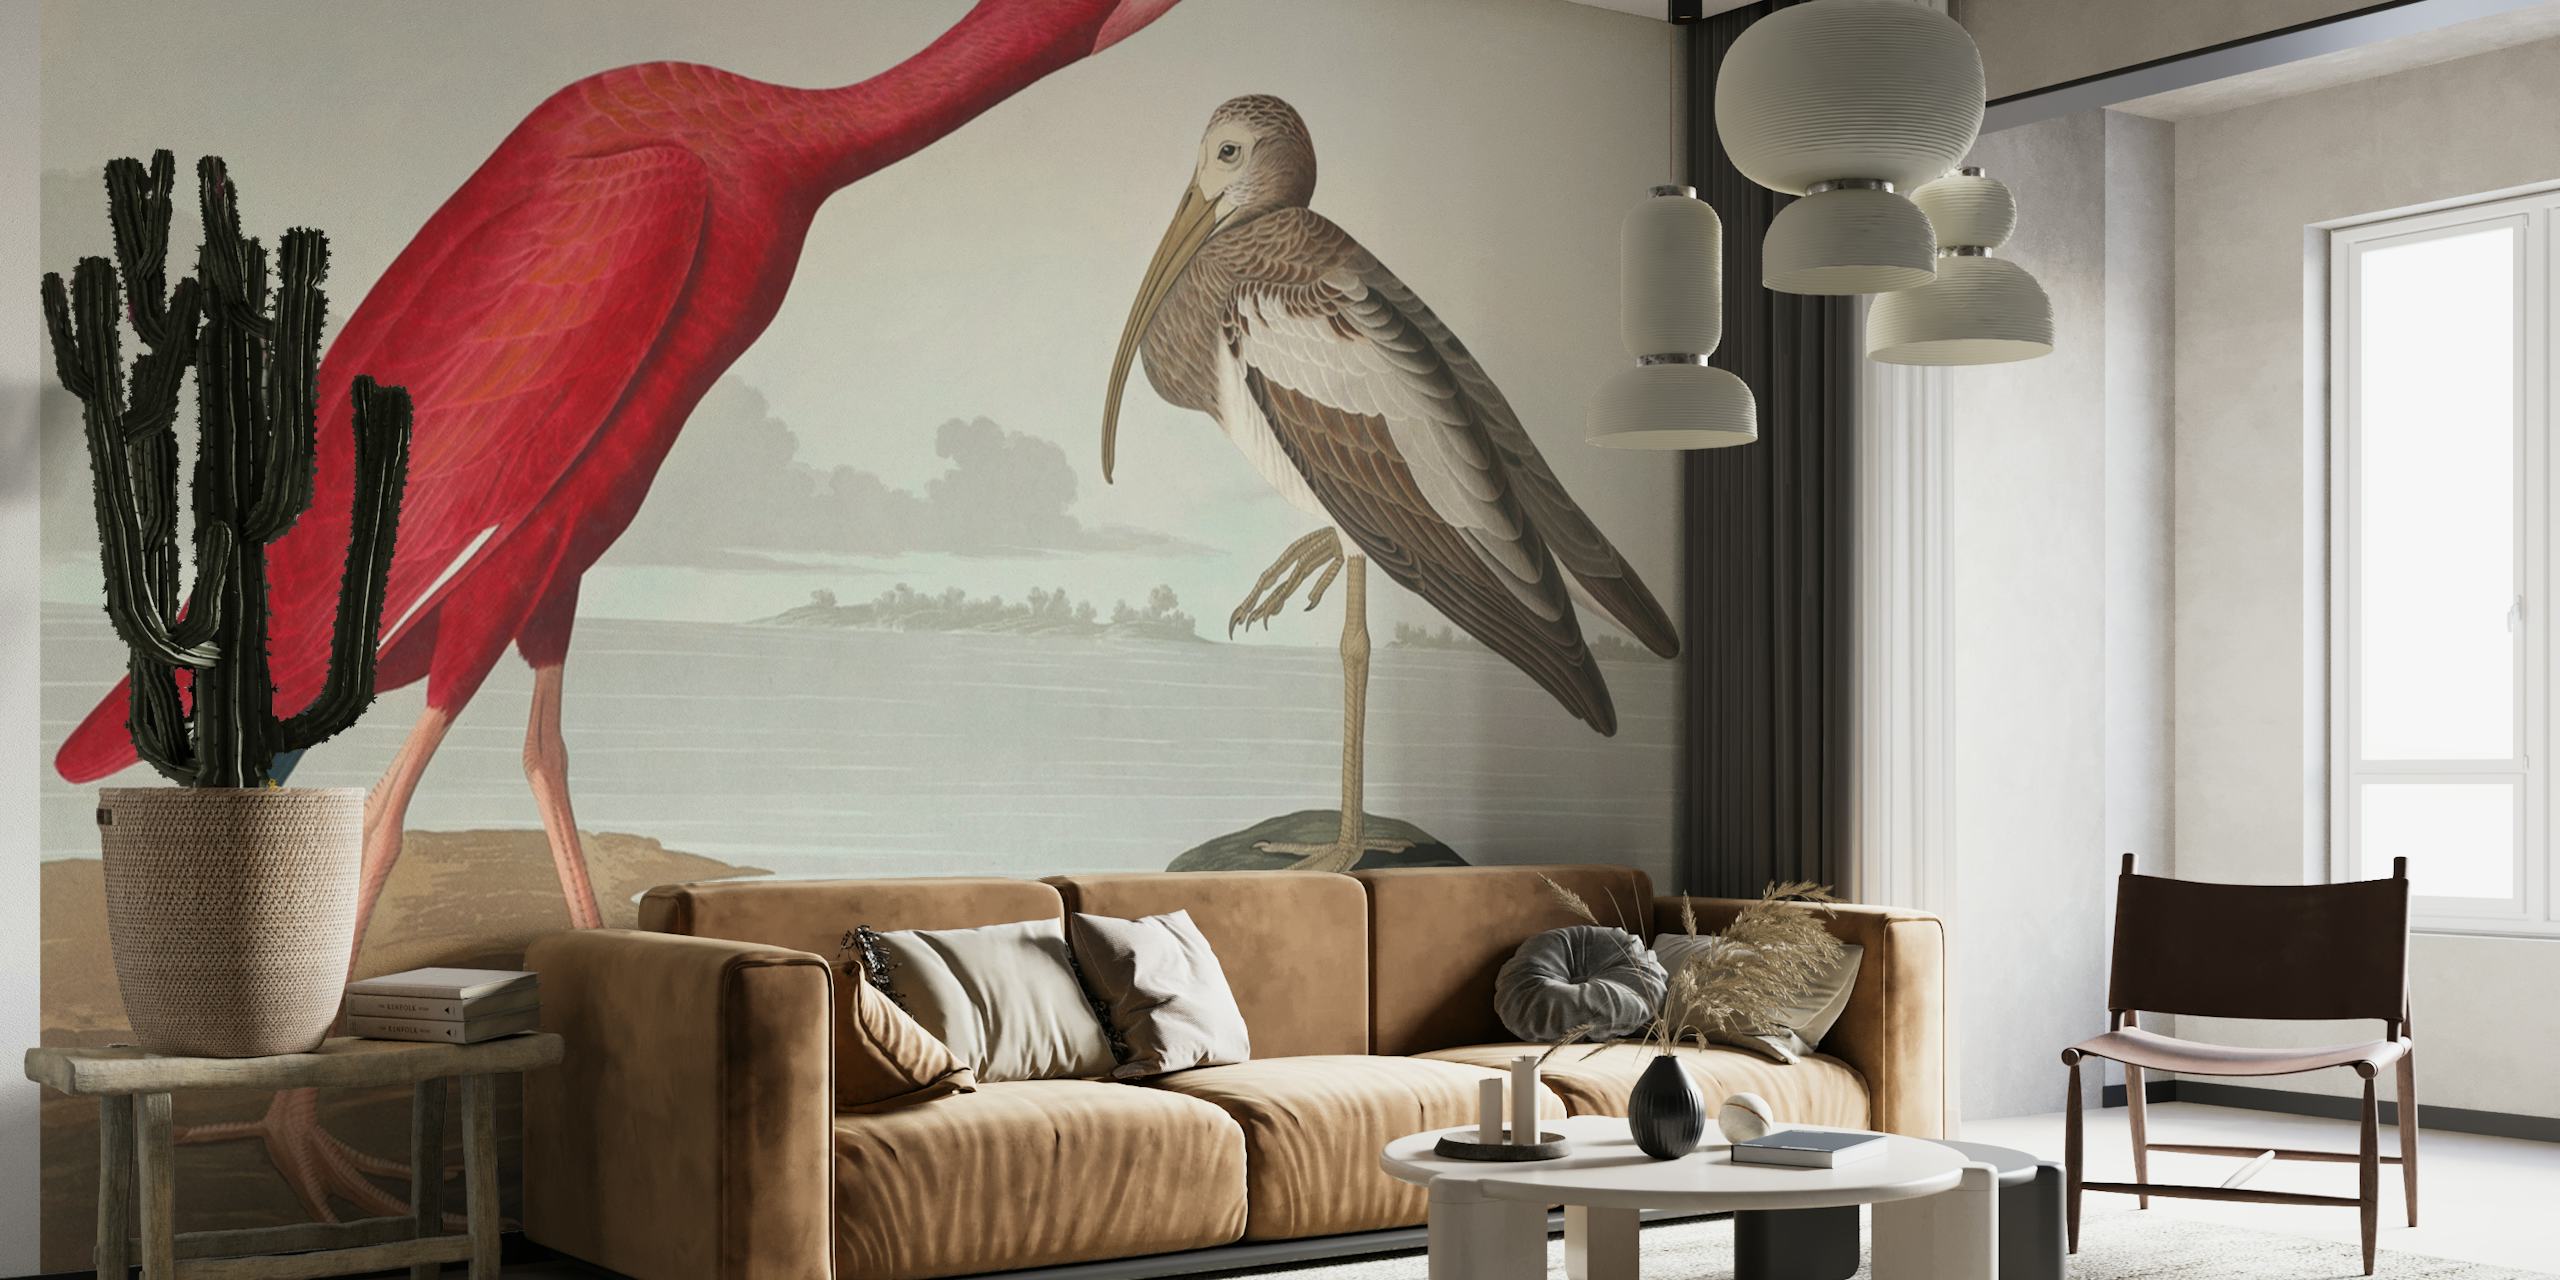 Illustrative wall mural of vintage tropical birds in subtle colors